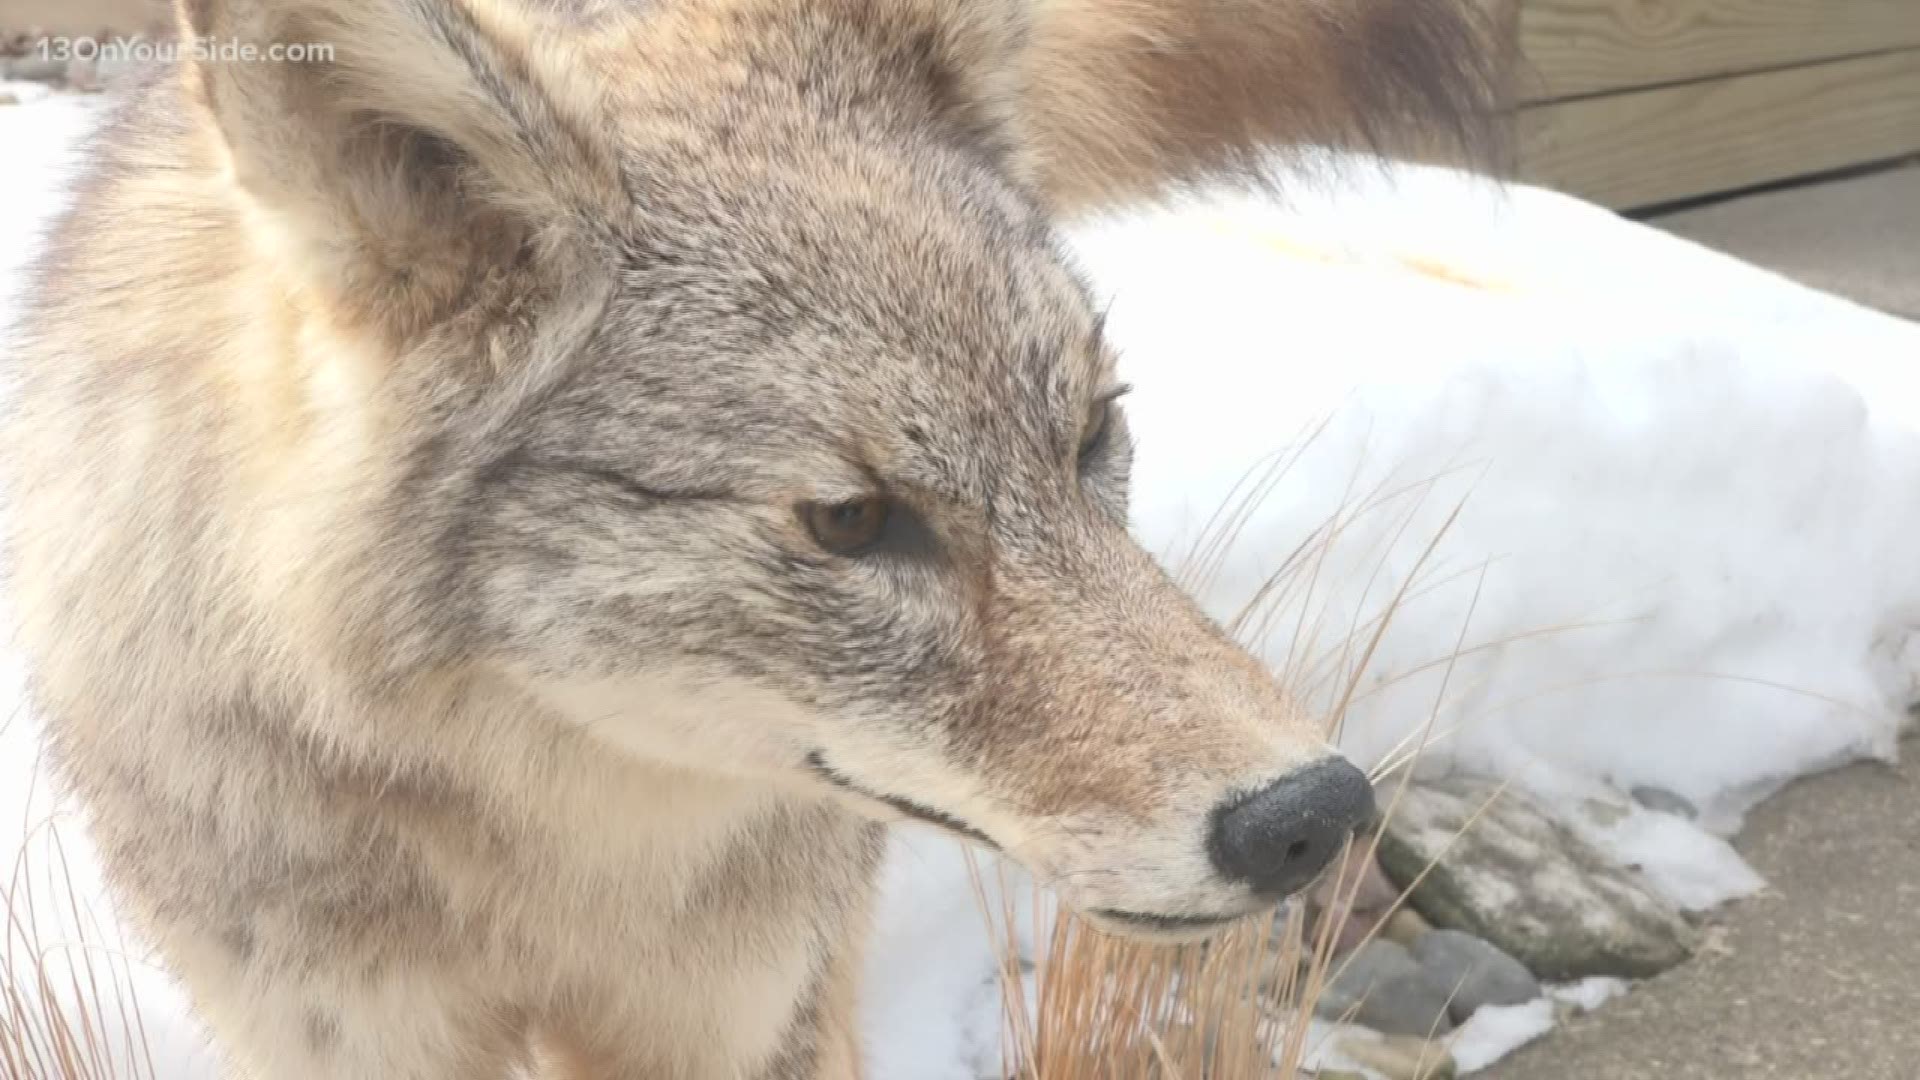 February is a peak month for coyotes' breeding season.